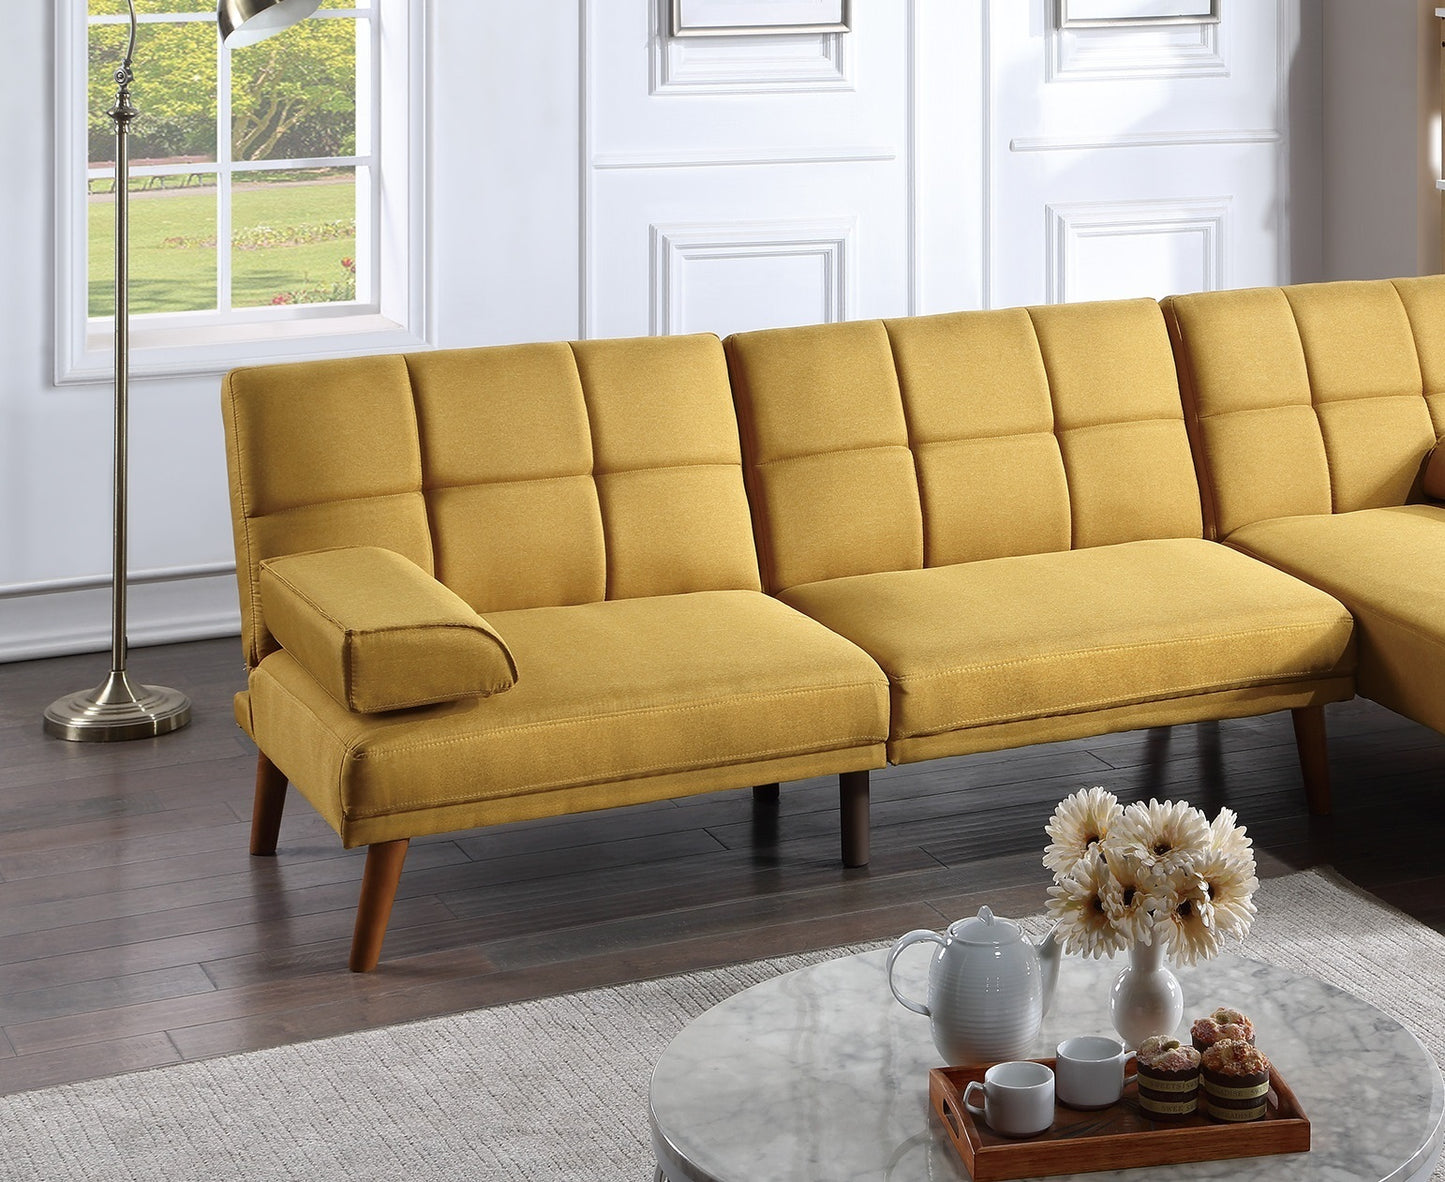 BASIT Collection Mustard Color Polyfiber Sectional Sofa Set Living Room Furniture Solid wood Legs Tufted Couch Adjustable Sofa Chaise